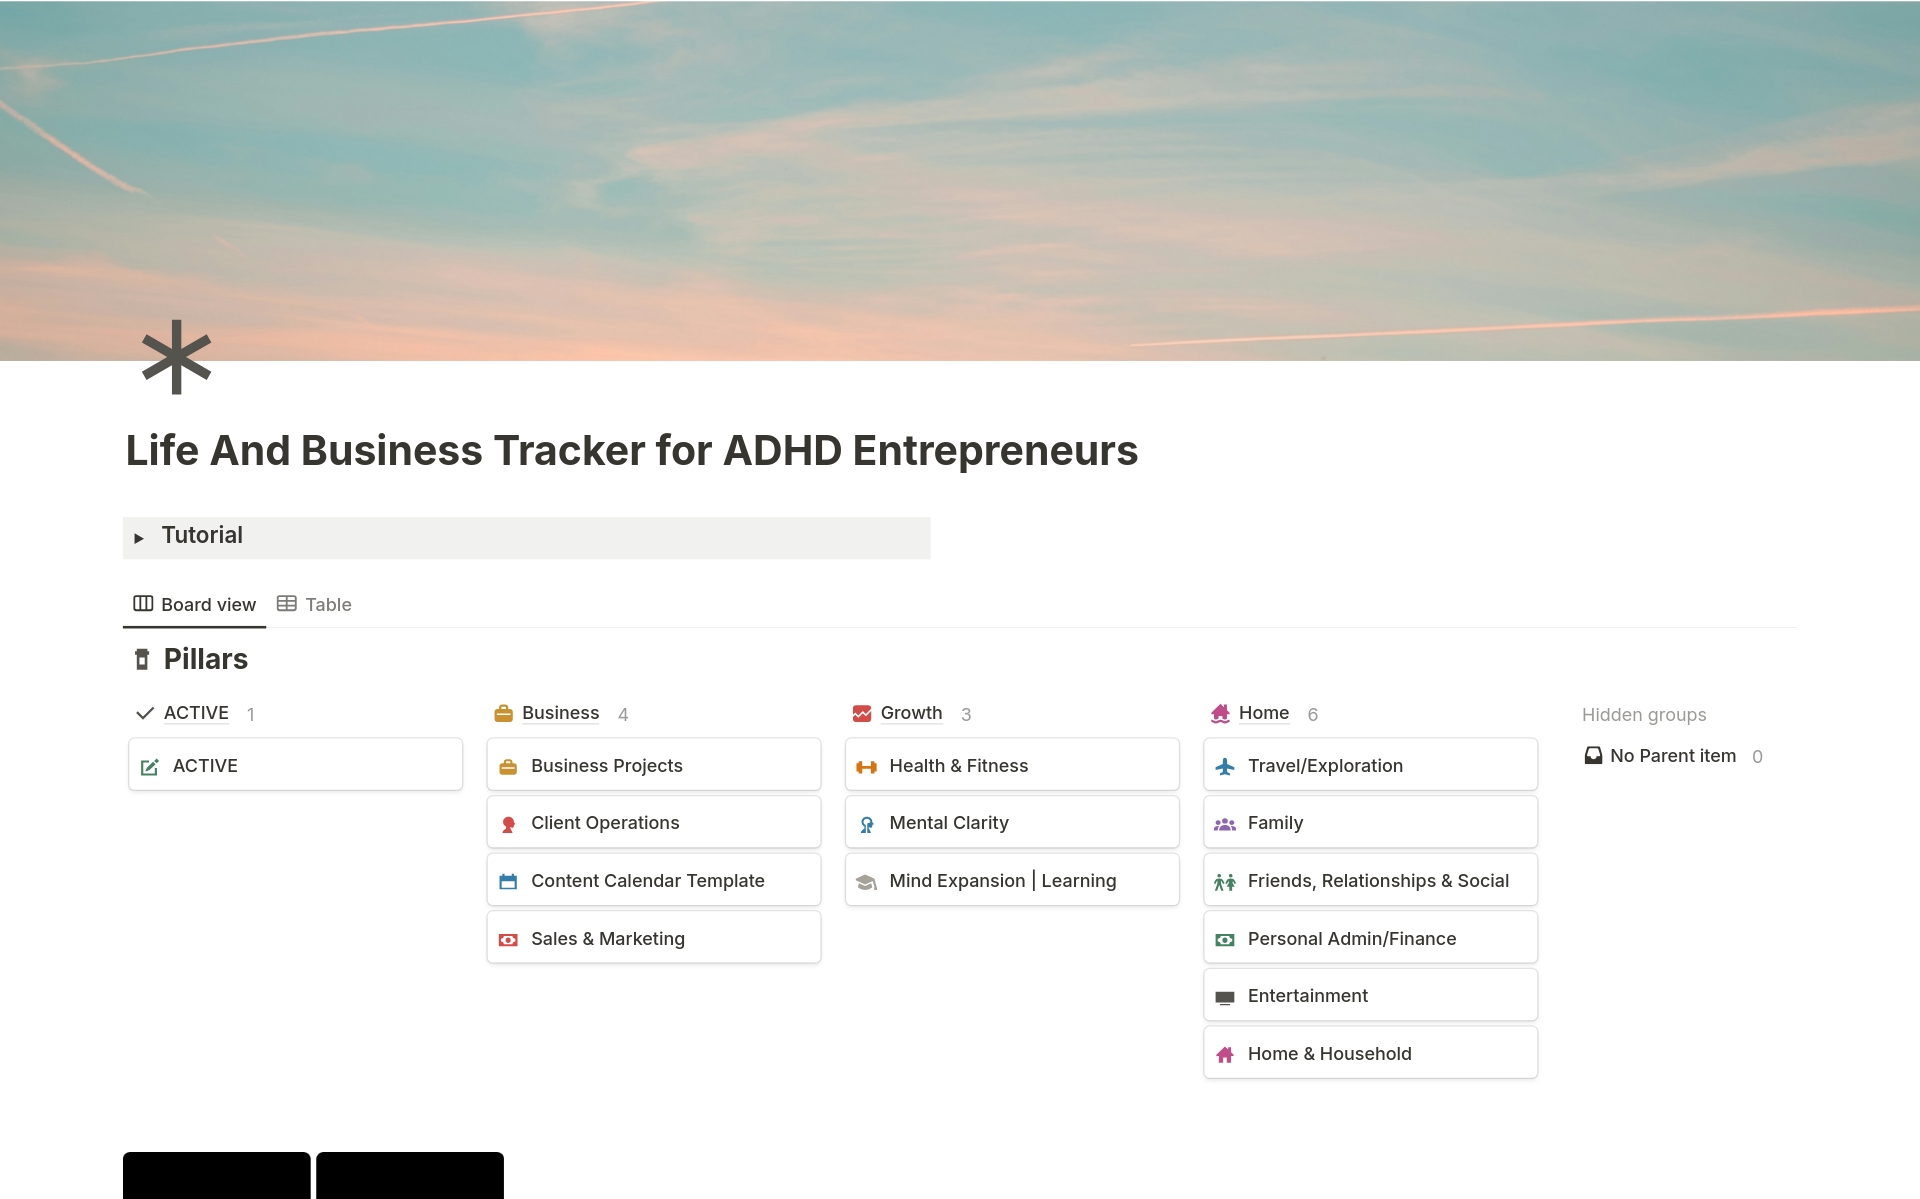 Conquer ADHD & win the day!  My Life & Business Tracker Notion template empowers ADHD entrepreneurs.  Organize tasks, projects, & goals.  Boost focus & slay procrastination.  Free up mental space & thrive! 